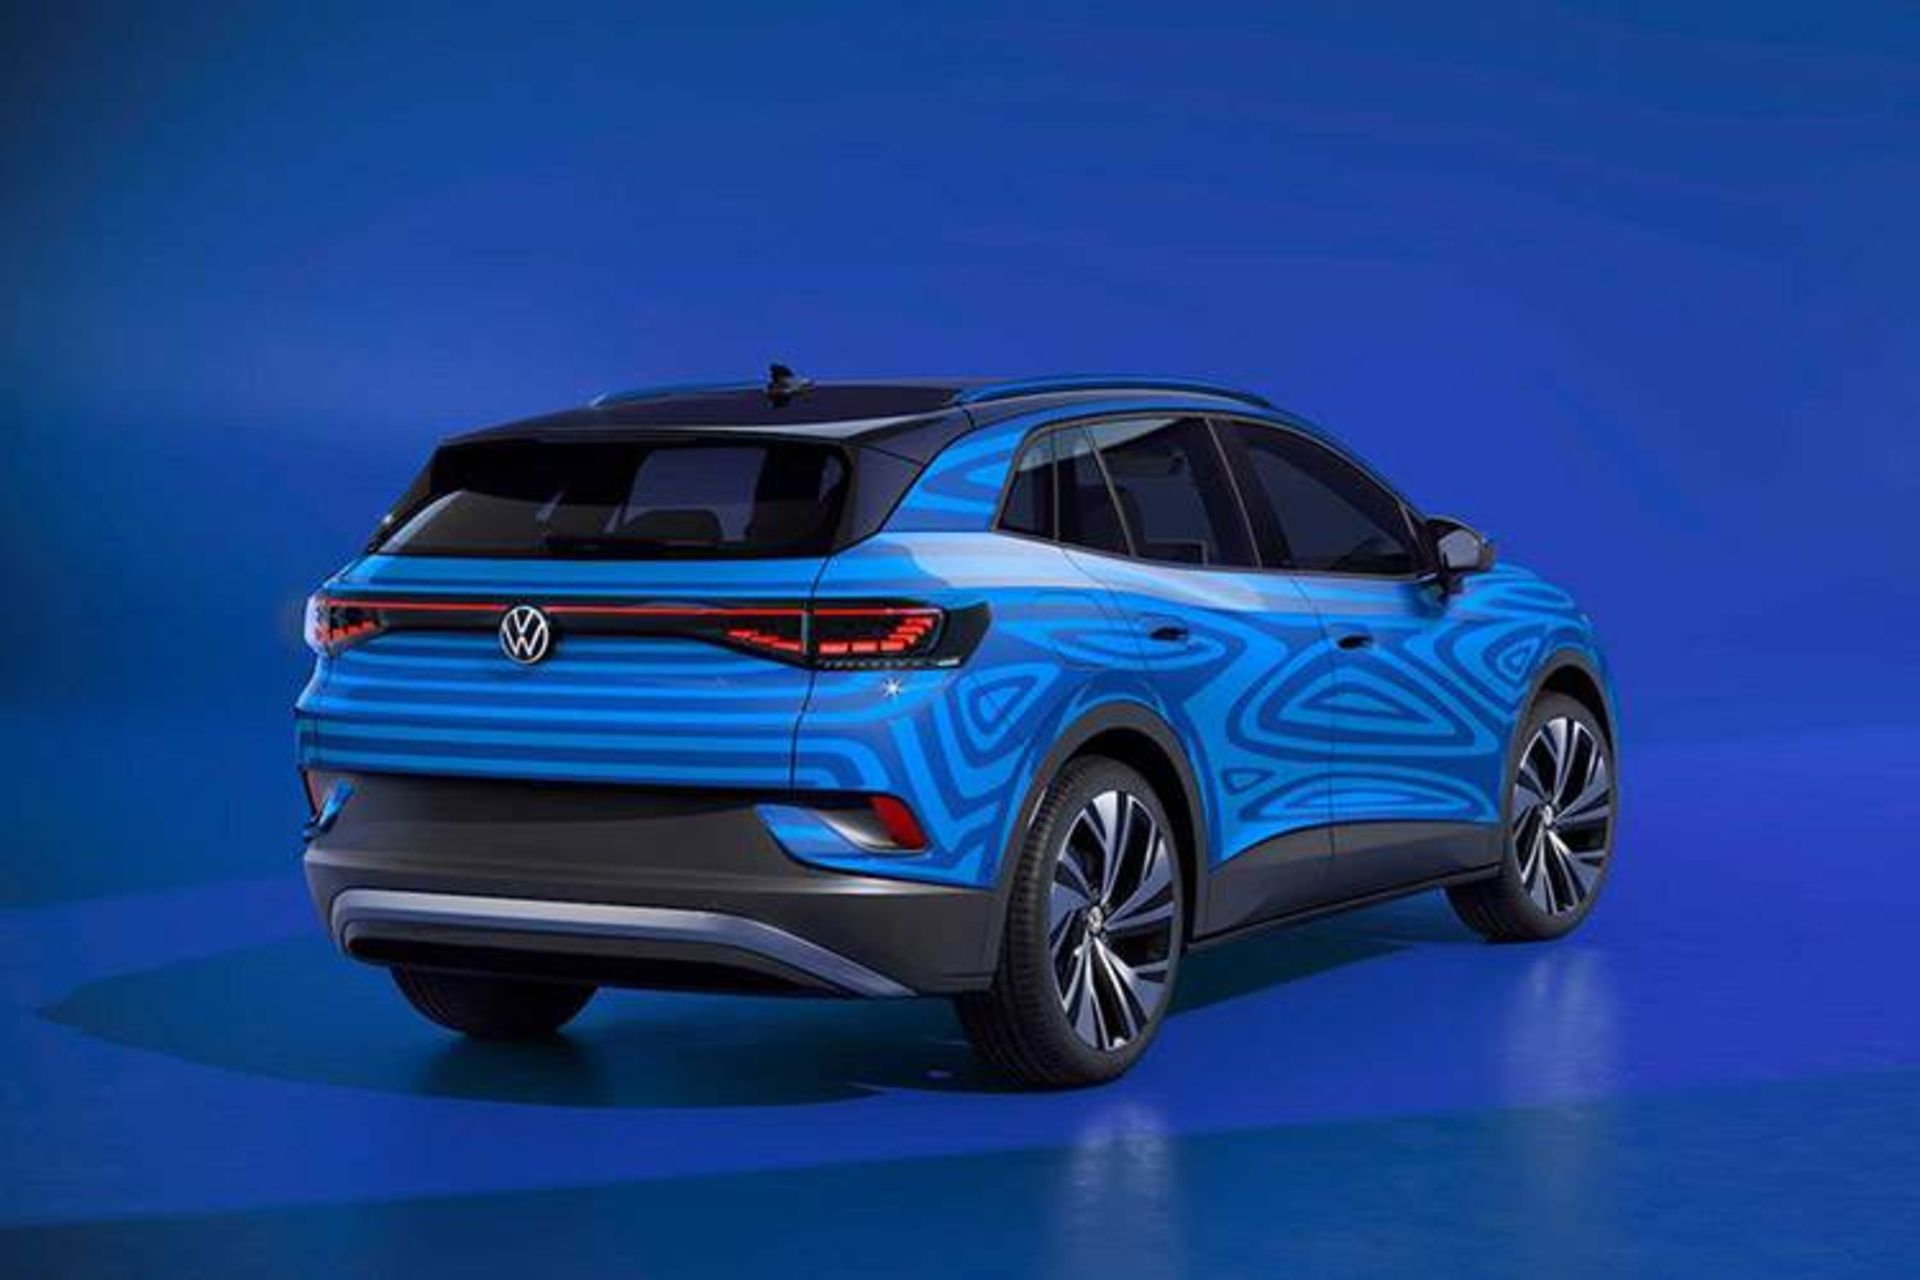 Volkswagen ID.4 Crossover / کراس اور فولکس واگن ID